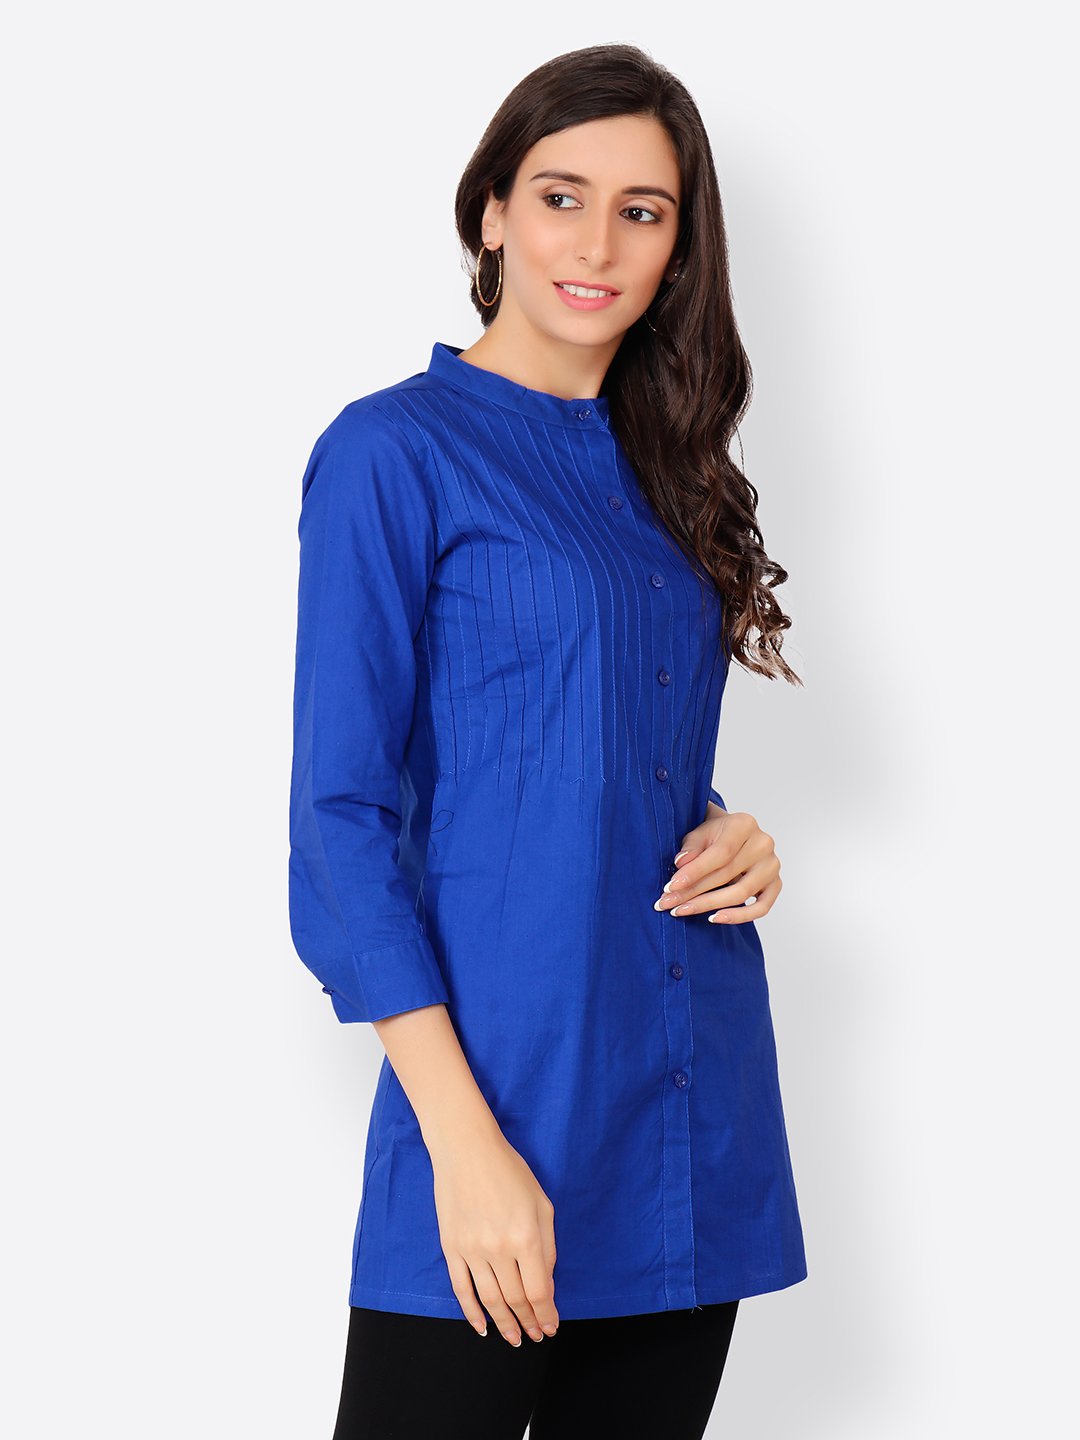 Cation Blue Tunic